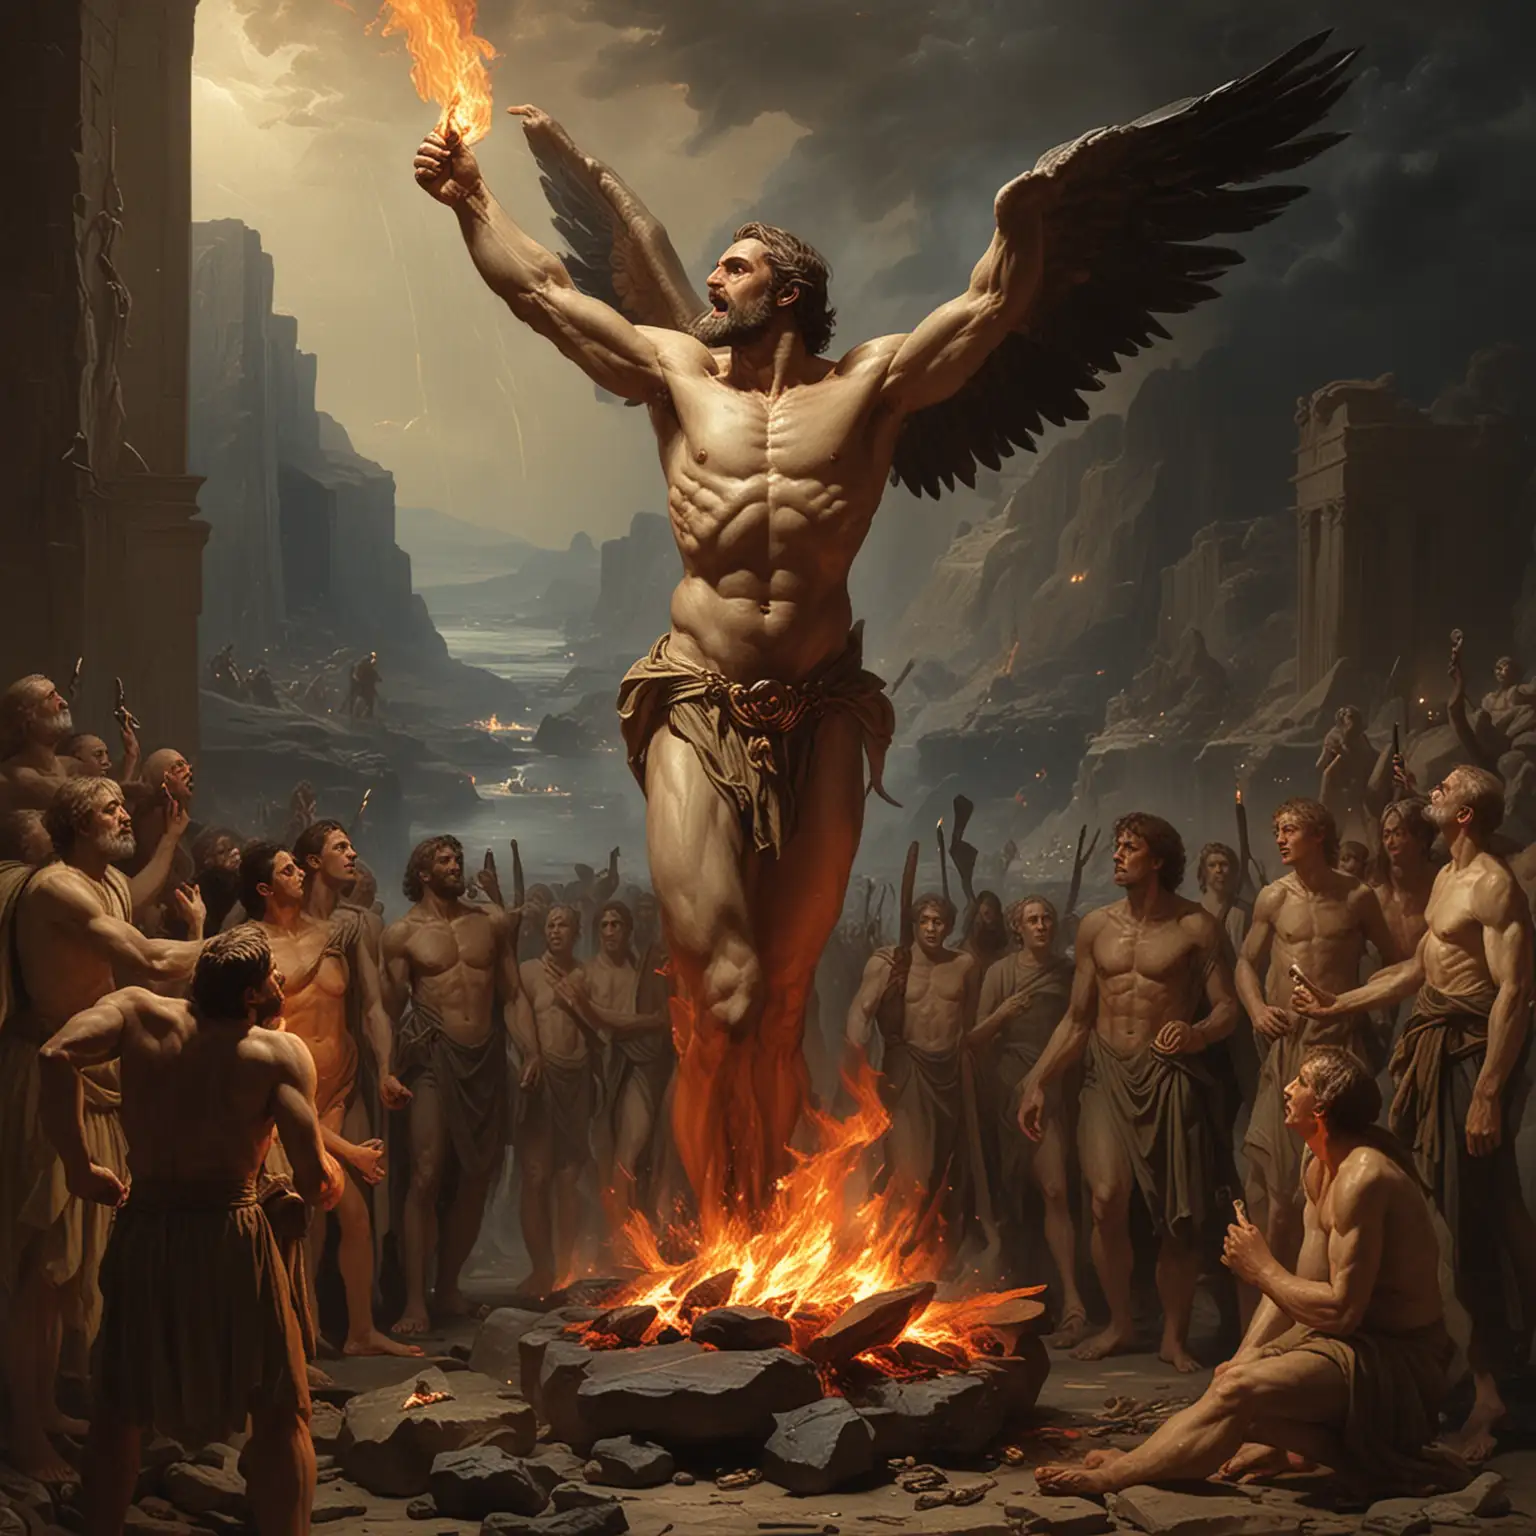 Prometheus-Sharing-Fire-with-Humanity-Mythical-Scene-Depicting-the-Iconic-Act-of-Fire-Bestowal